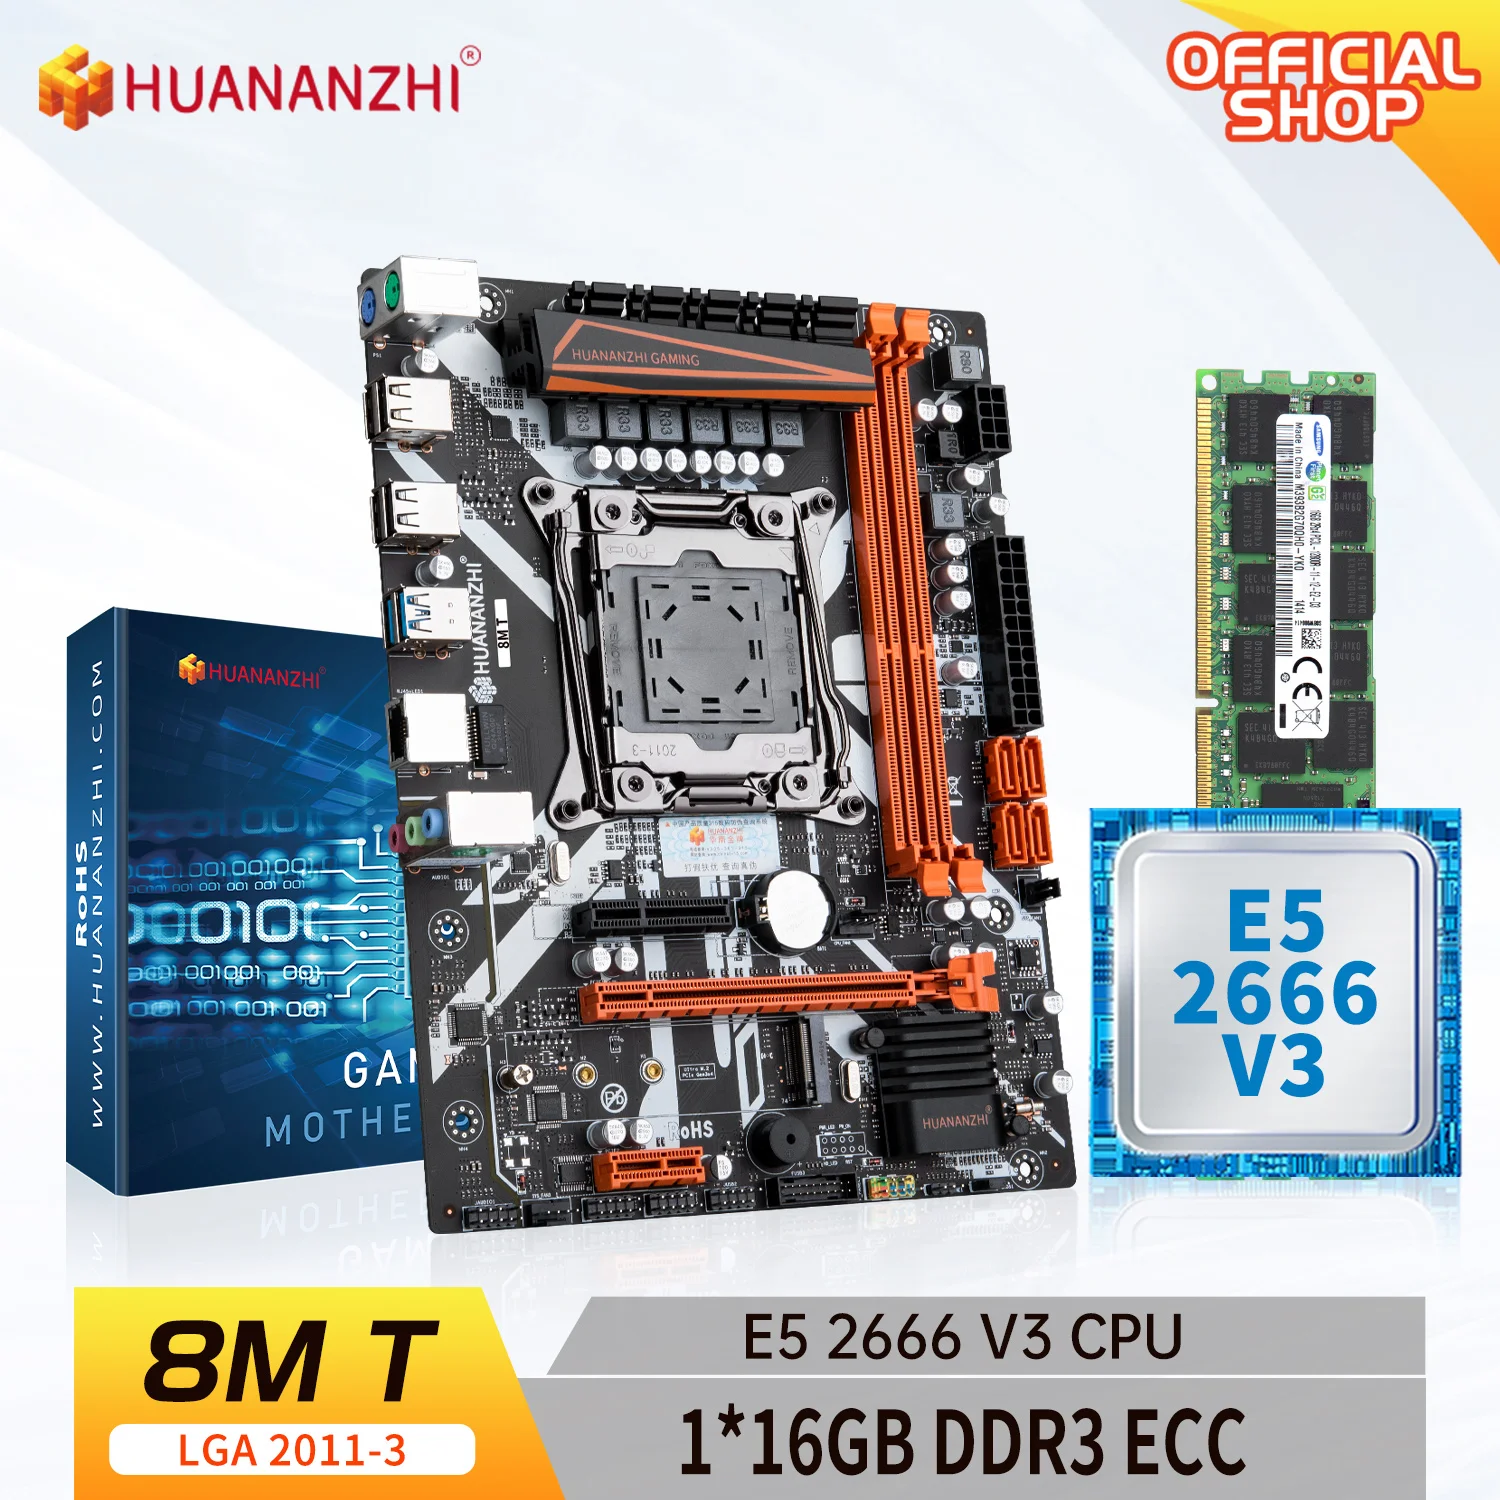 

HUANANZHI X99 8M T LGA 2011-3 XEON X99 Motherboard with Intel E5 2666 V3 with 1*16G DDR3 RECC memory combo kit set NVME